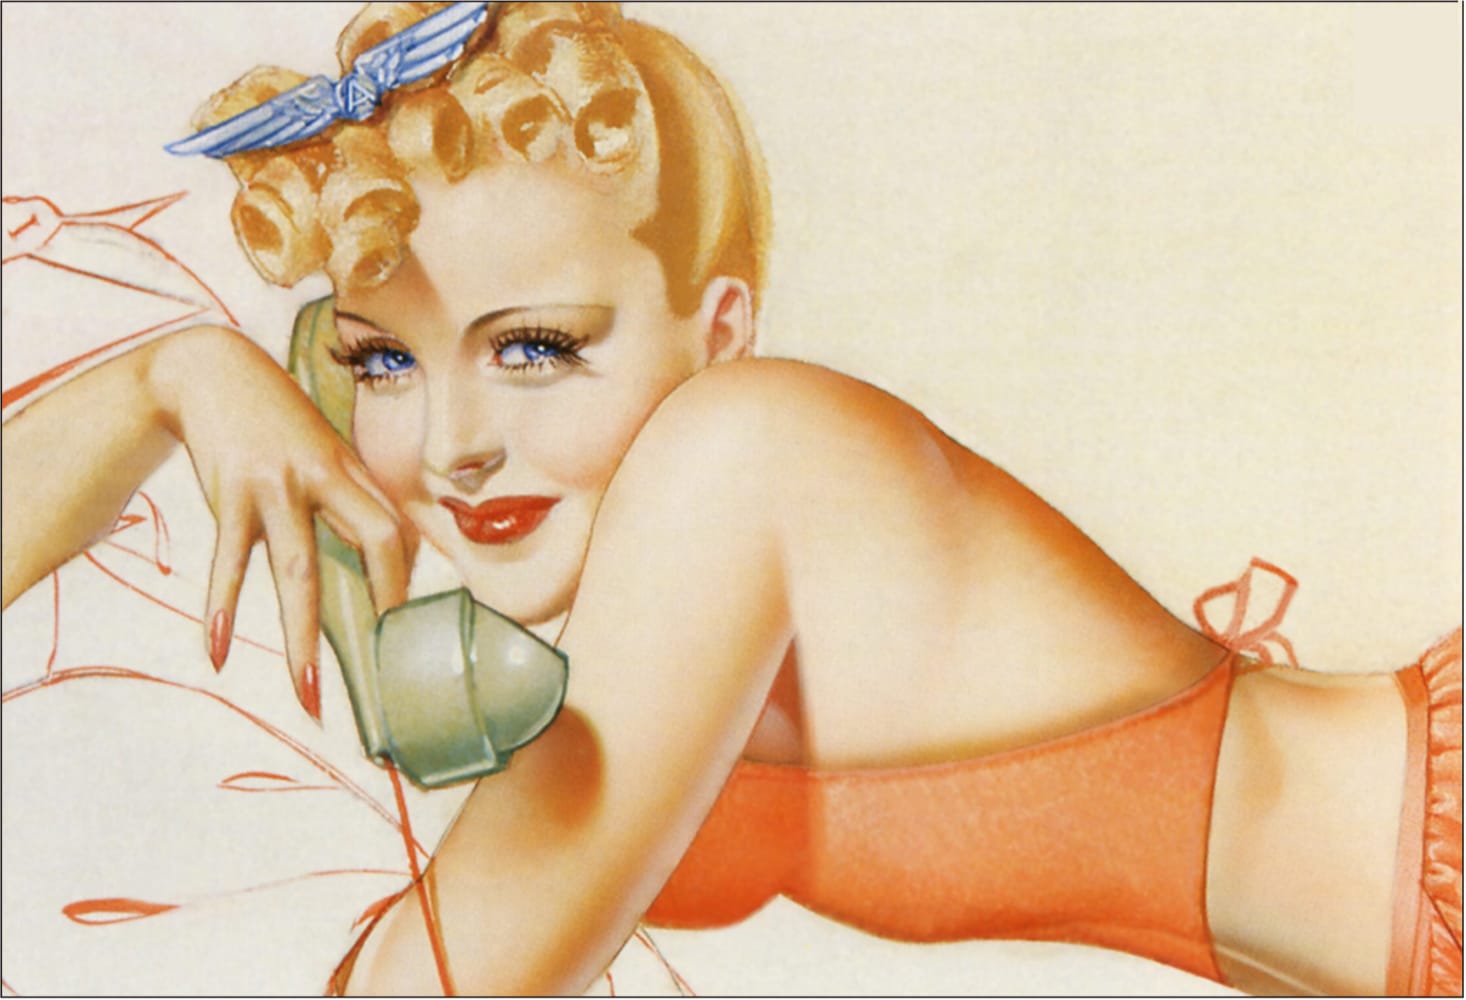 THIS IS ONLY A SMALL SELECTION Have ALL 4,300 Classic Pin-Up Images on YOUR...